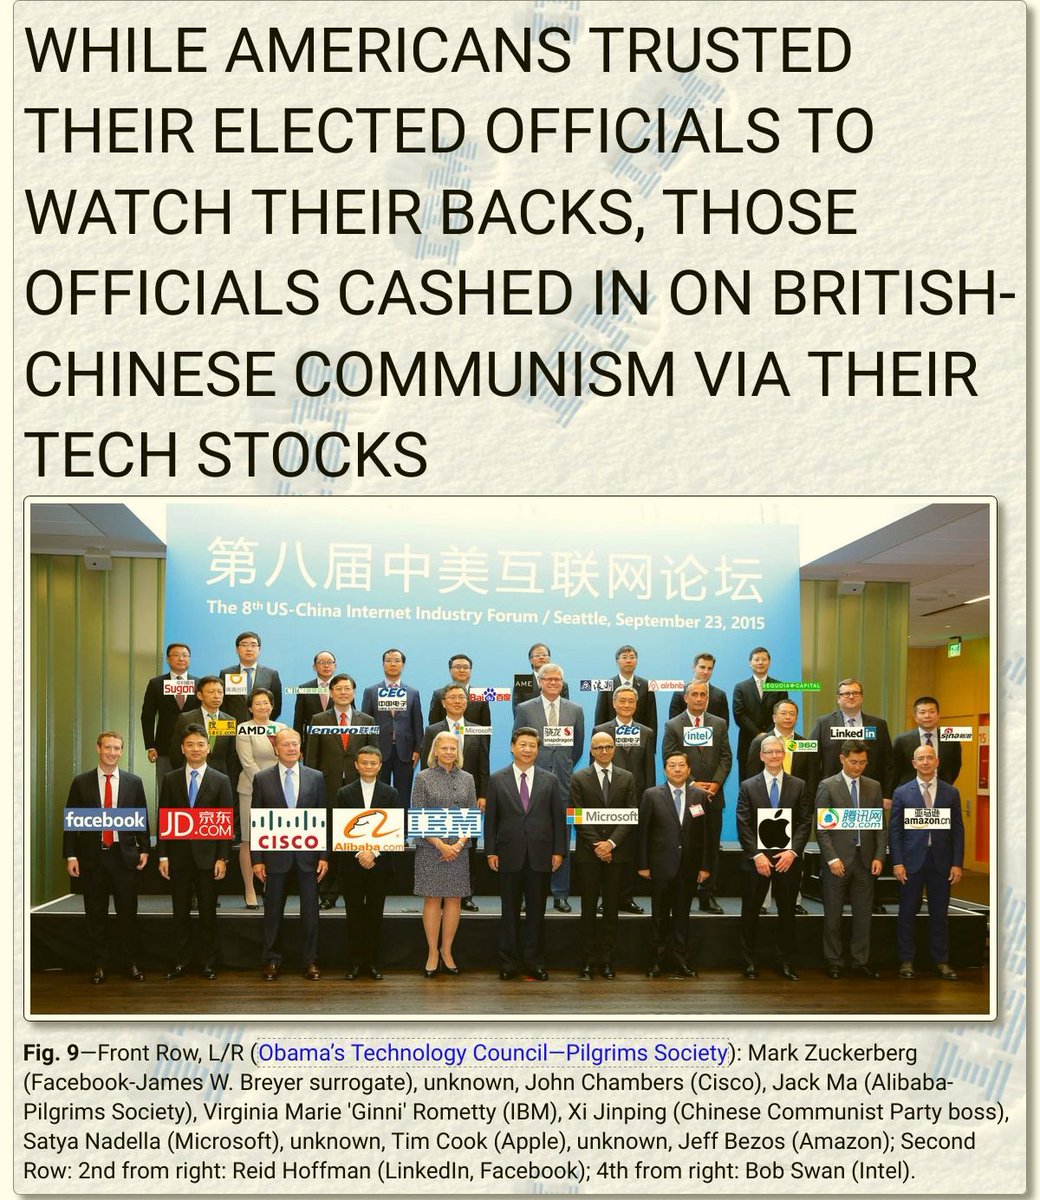 "While Americans trusted their elected officials to watch their backs, those officials cashed in on British-Chinese communism via their tech stocks"